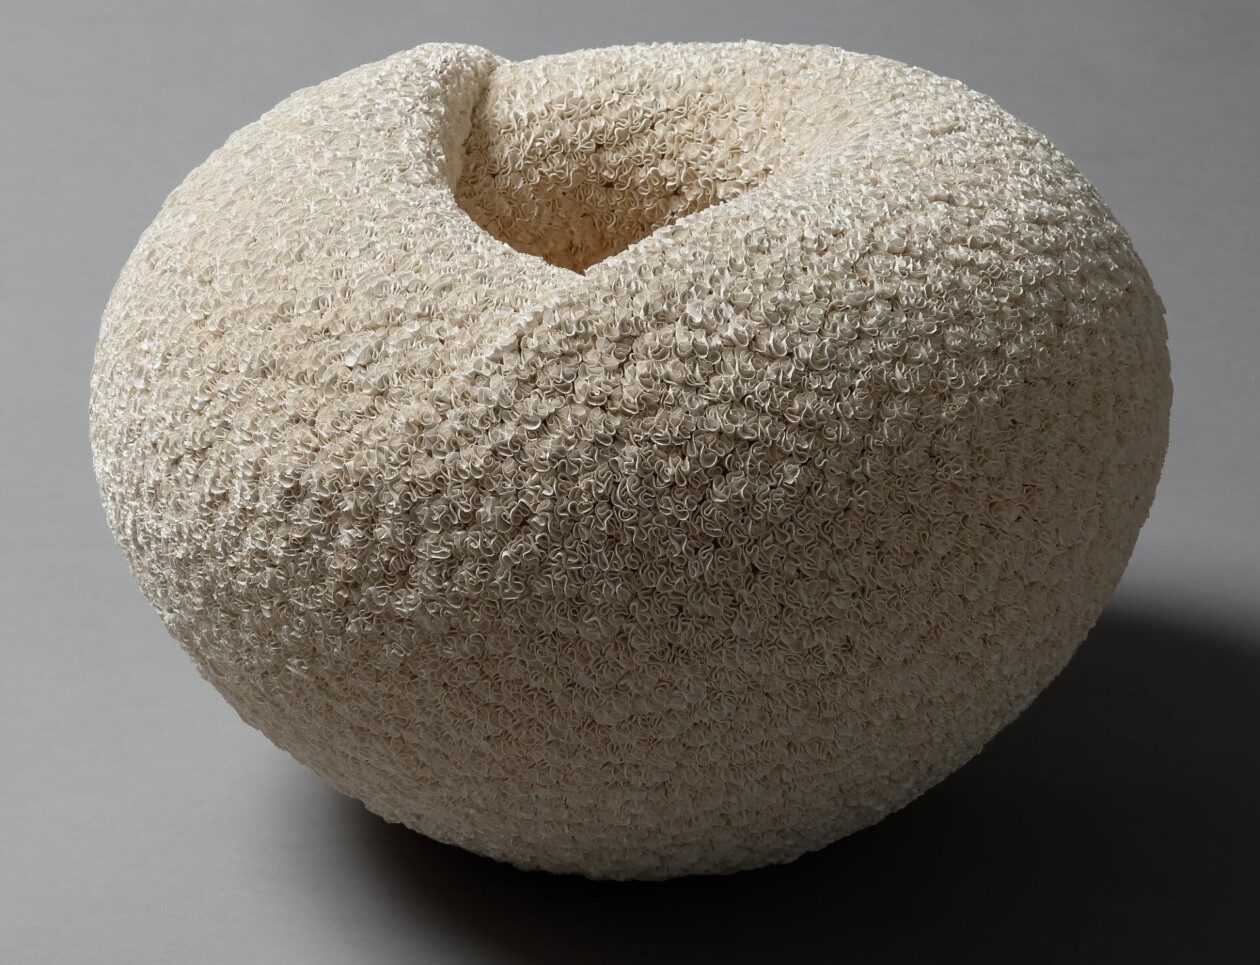 Intricately Coiled Porcelain Sculptures By Hattori Makiko (1)